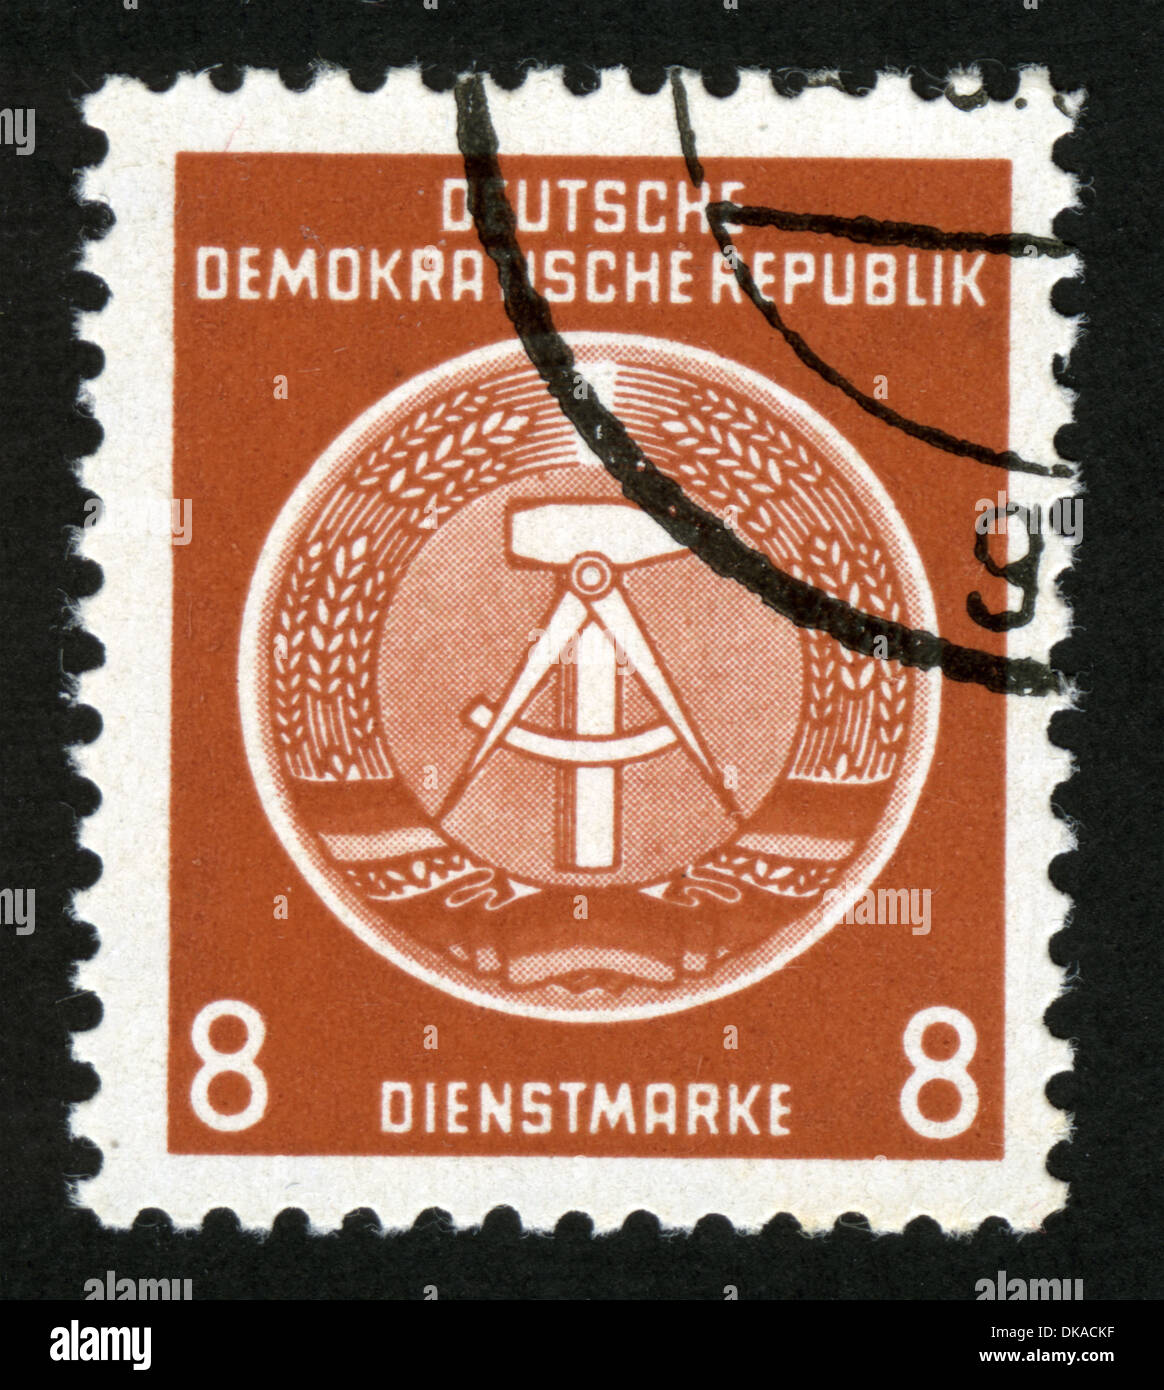 mail, postage stamps, Germany, German Democratic Republic, 8 pfennig official stamp, 1954, Germany Post, postage stamp Stock Photo